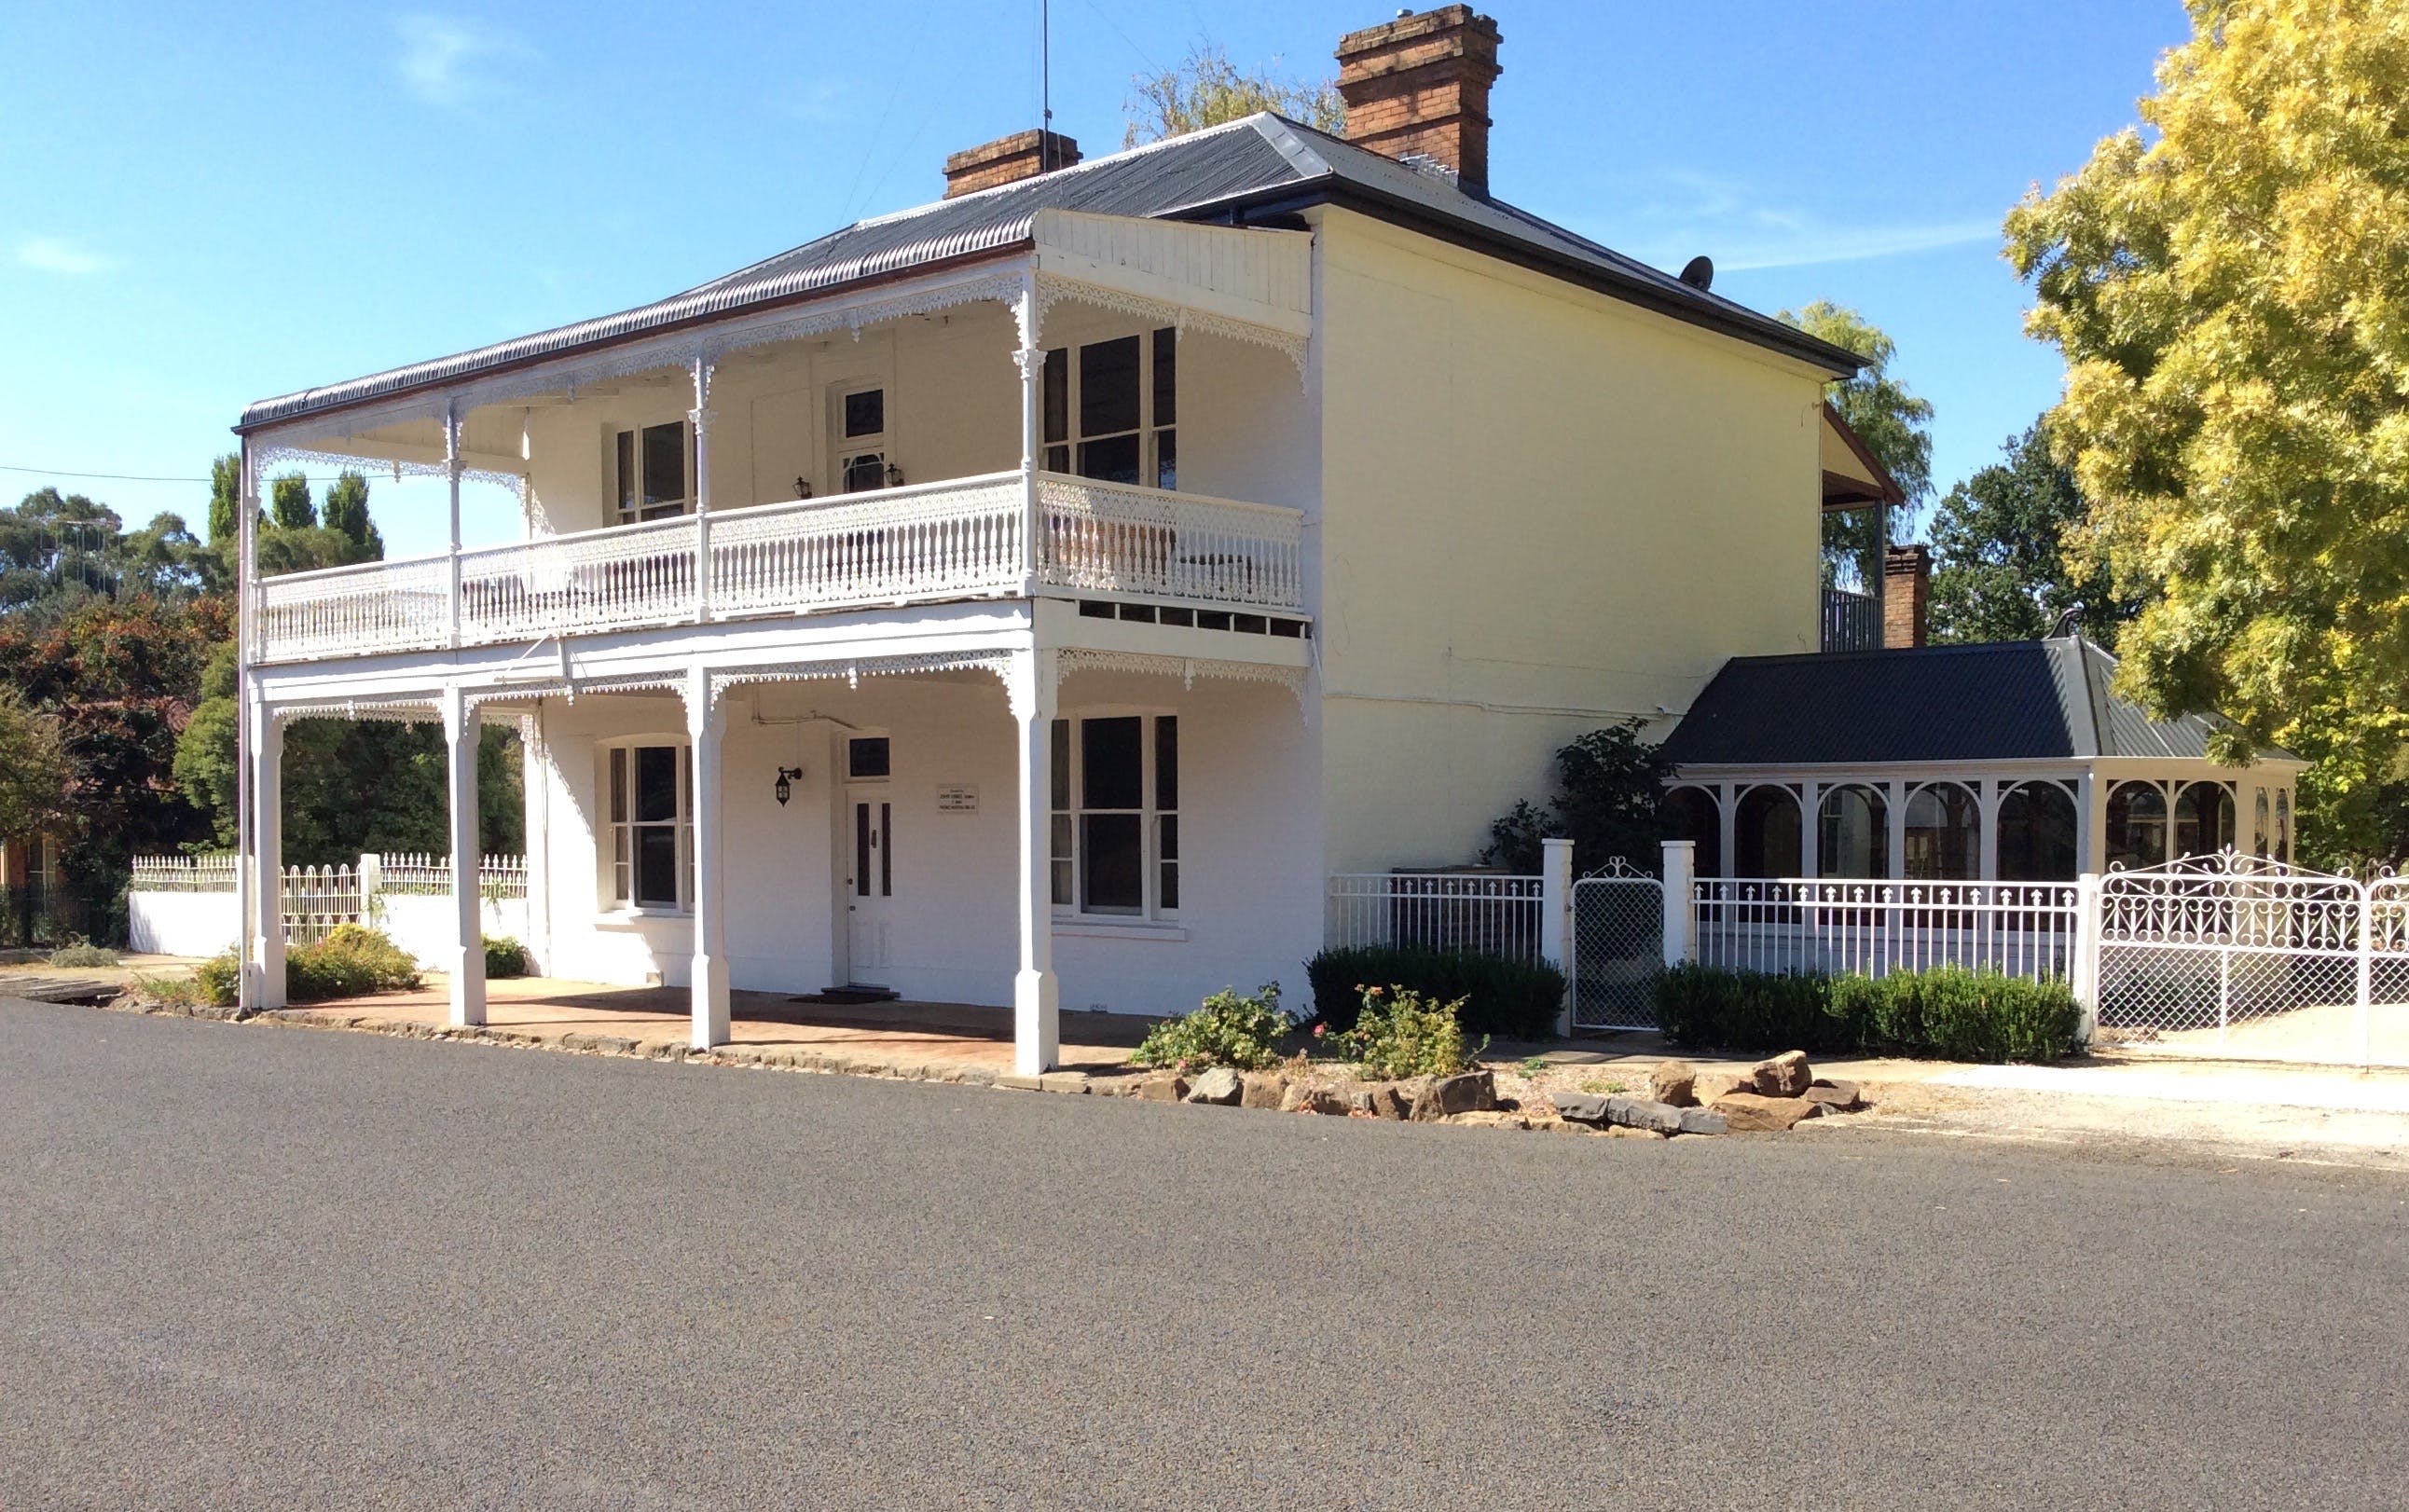 The White House Carcoar - Grafton Accommodation